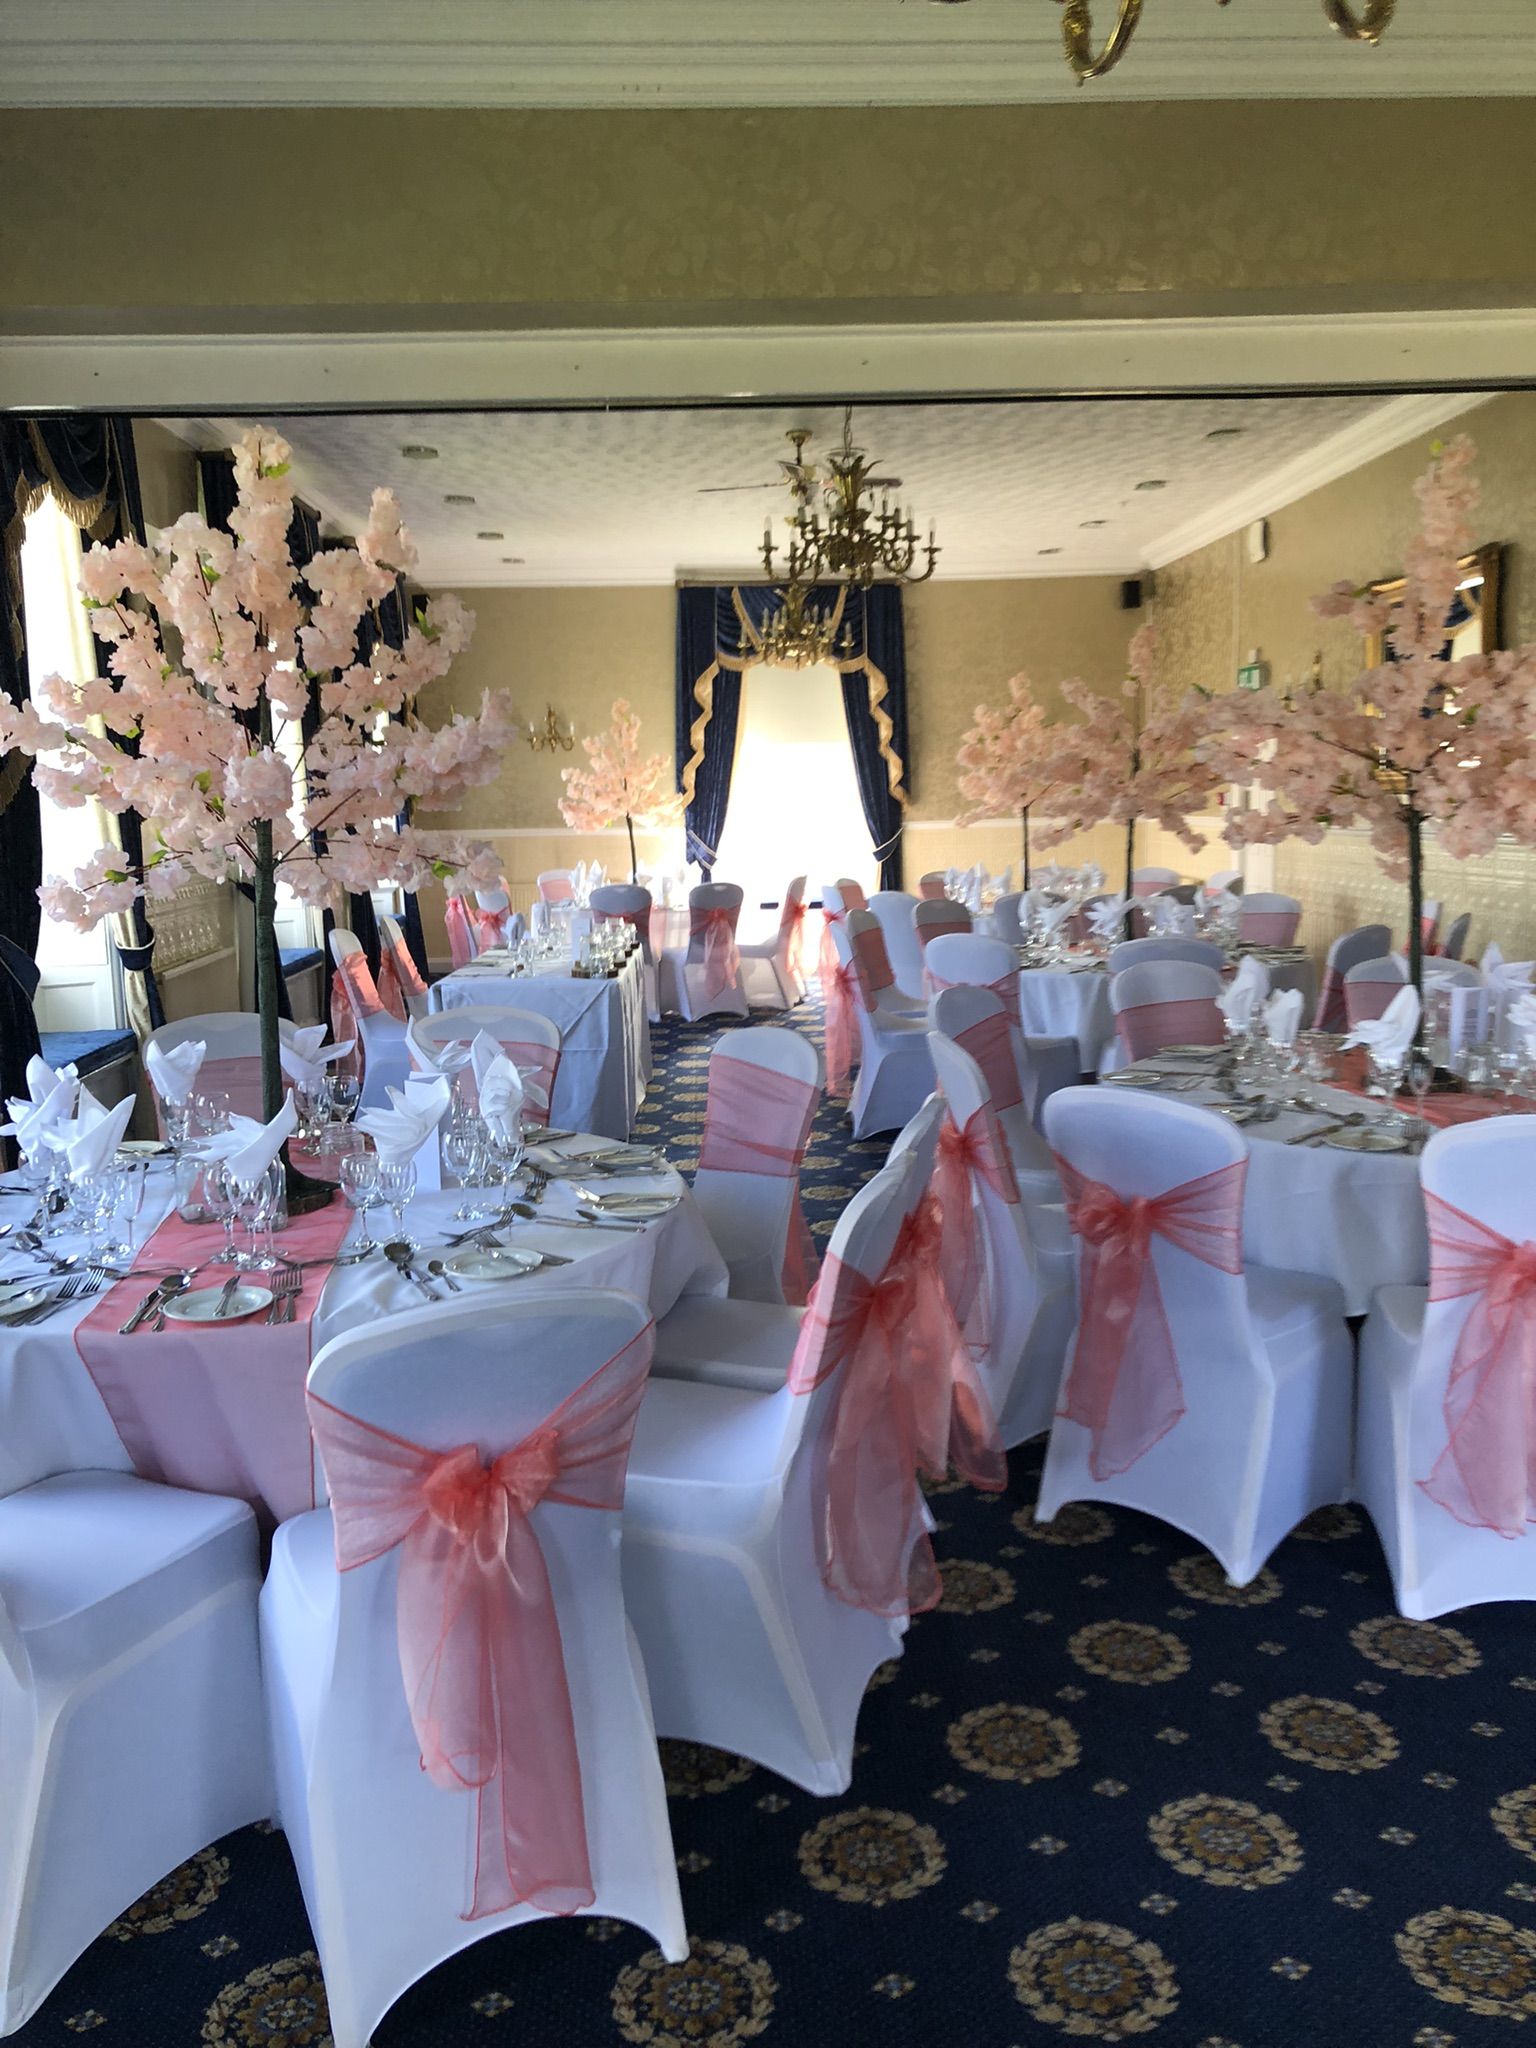 a room filled with tables covered in white and pink cloths.